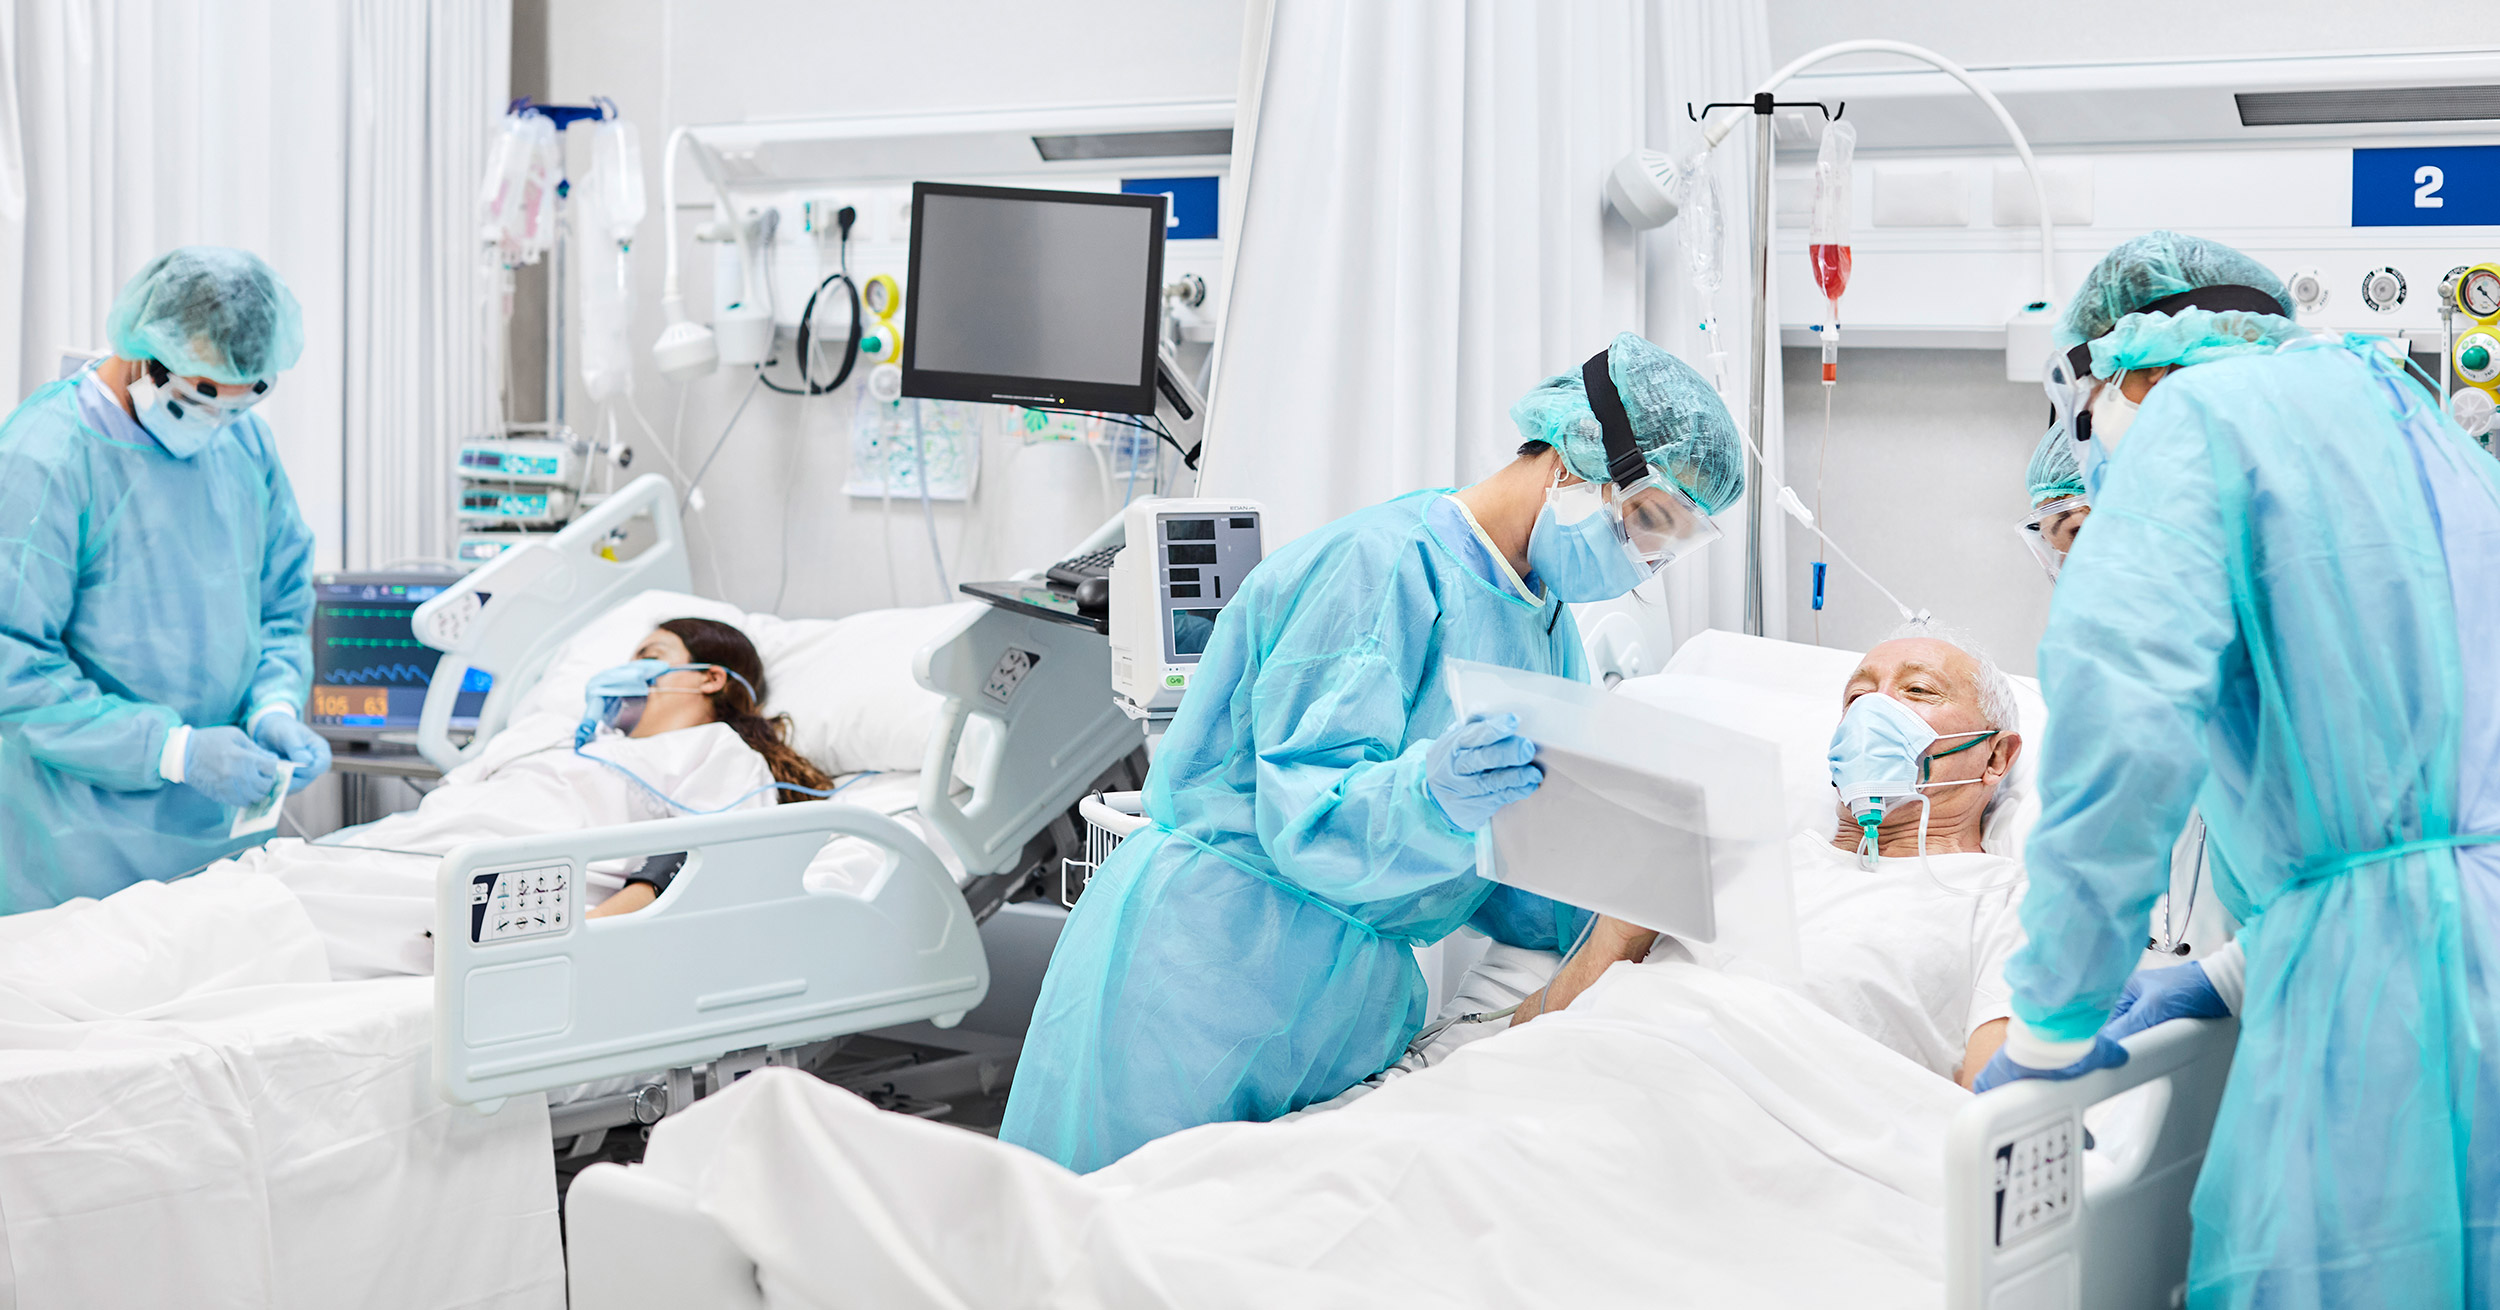 Infectious diseases are about to become a bigger presence in ICUs around the world.